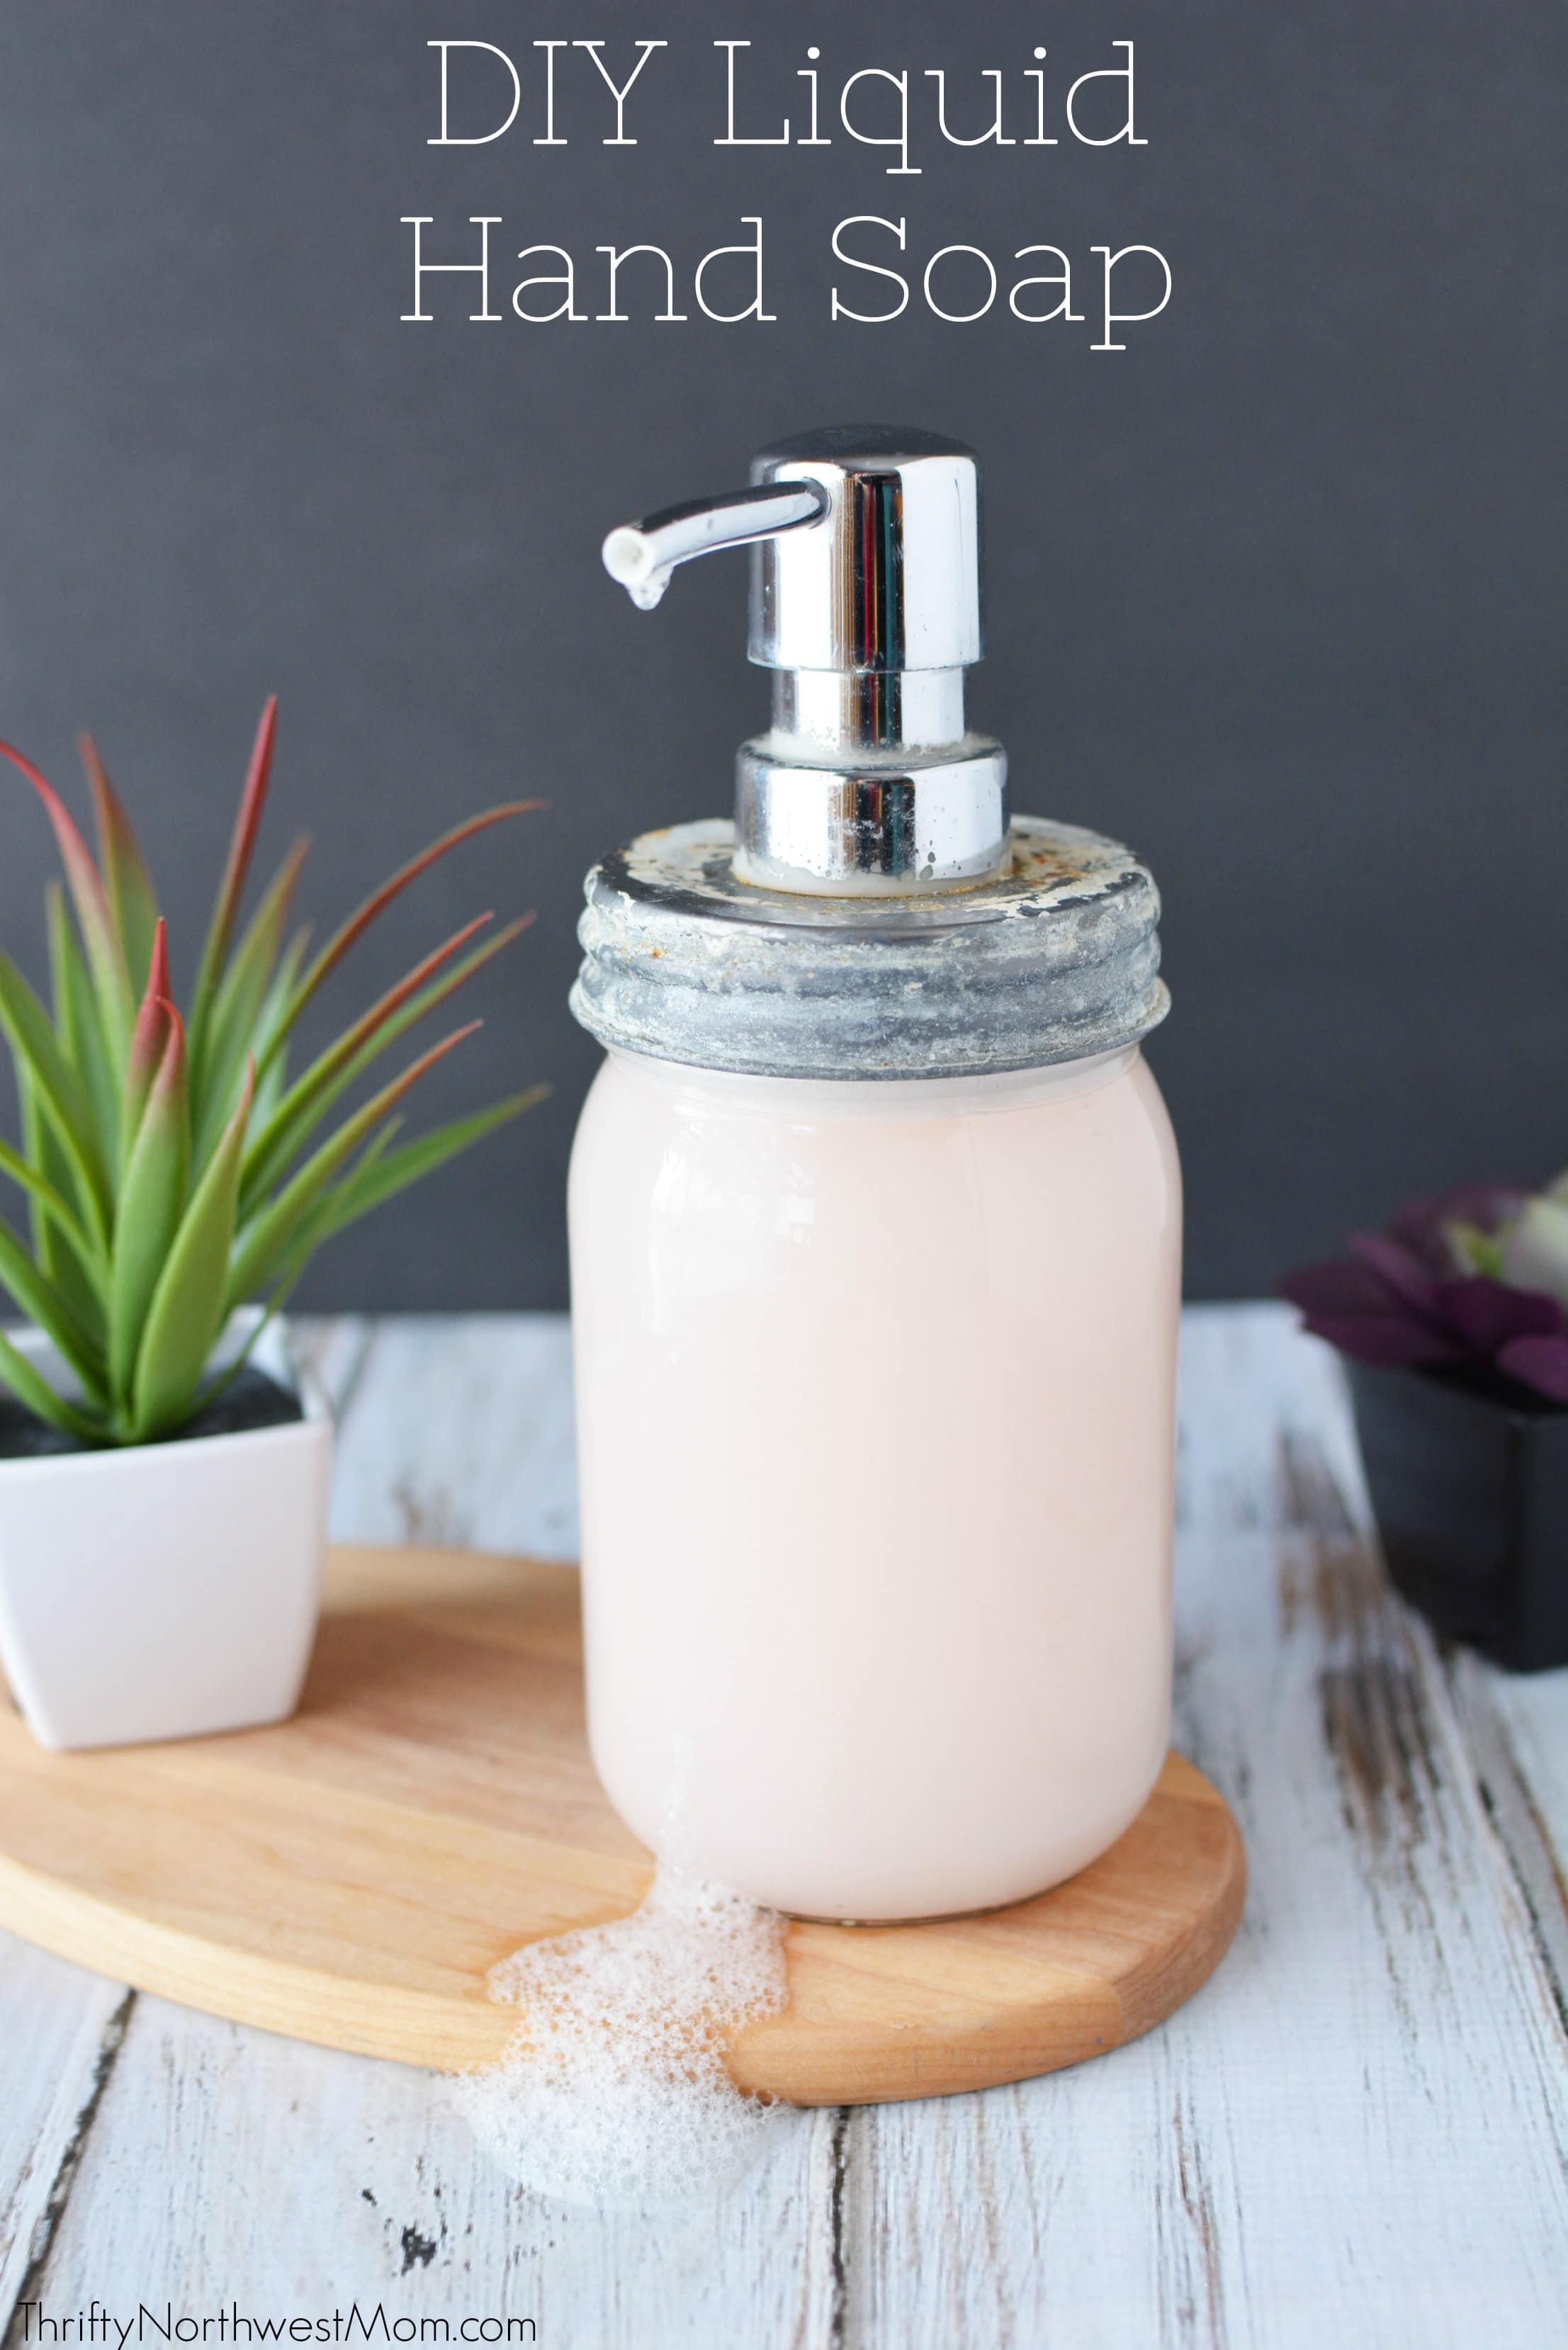 DIY Liquid Hand Soap - Frugal & Natural Alternative for your Home